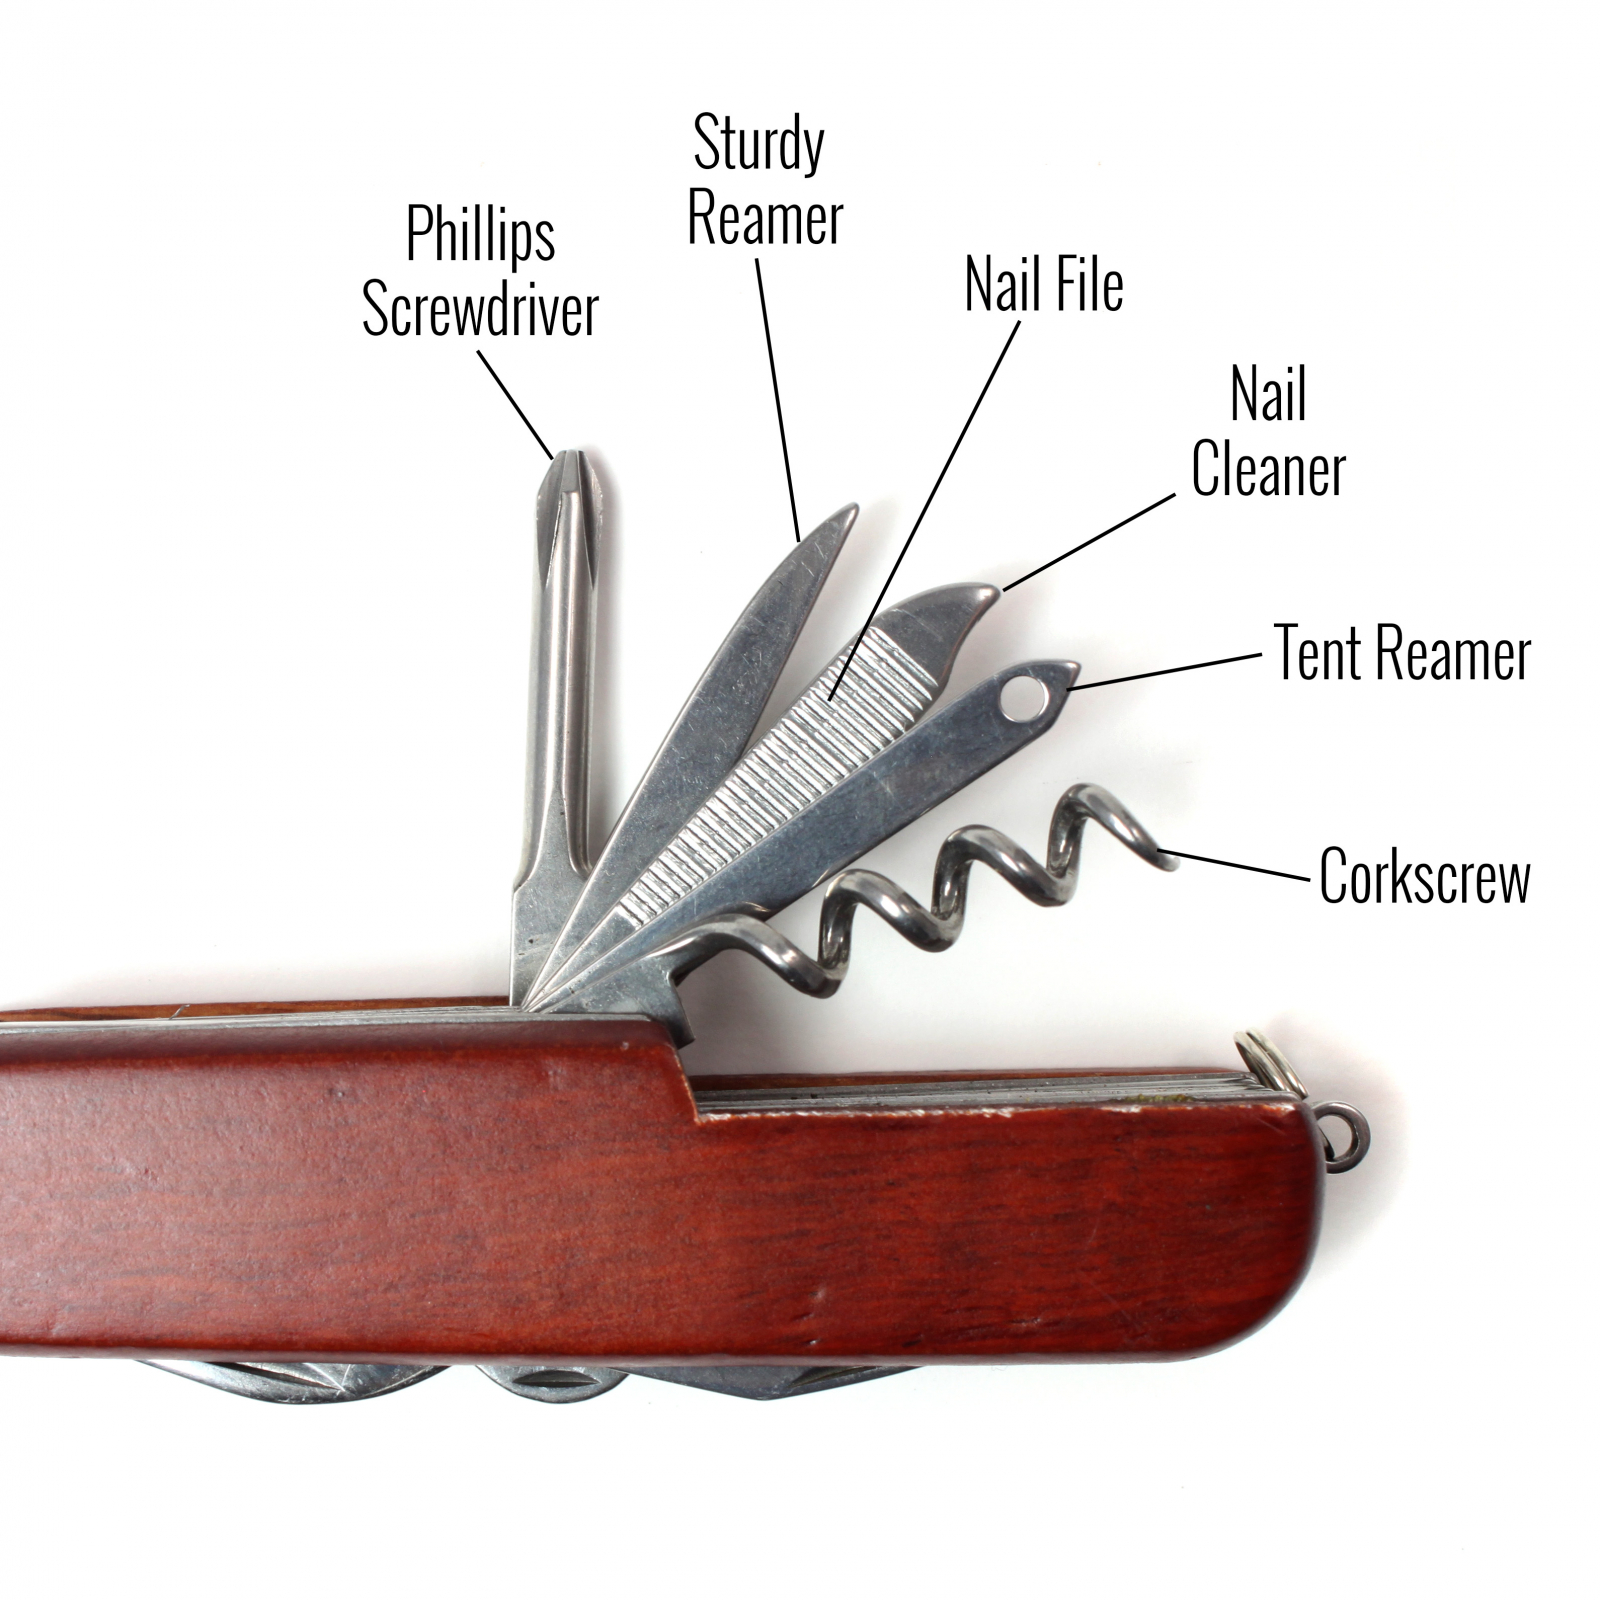 ASR Outdoor 3.5 Inch Compact 14 in 1 Folding Pocket Utility Knife Multi Tool with Wood Body - image 5 of 7